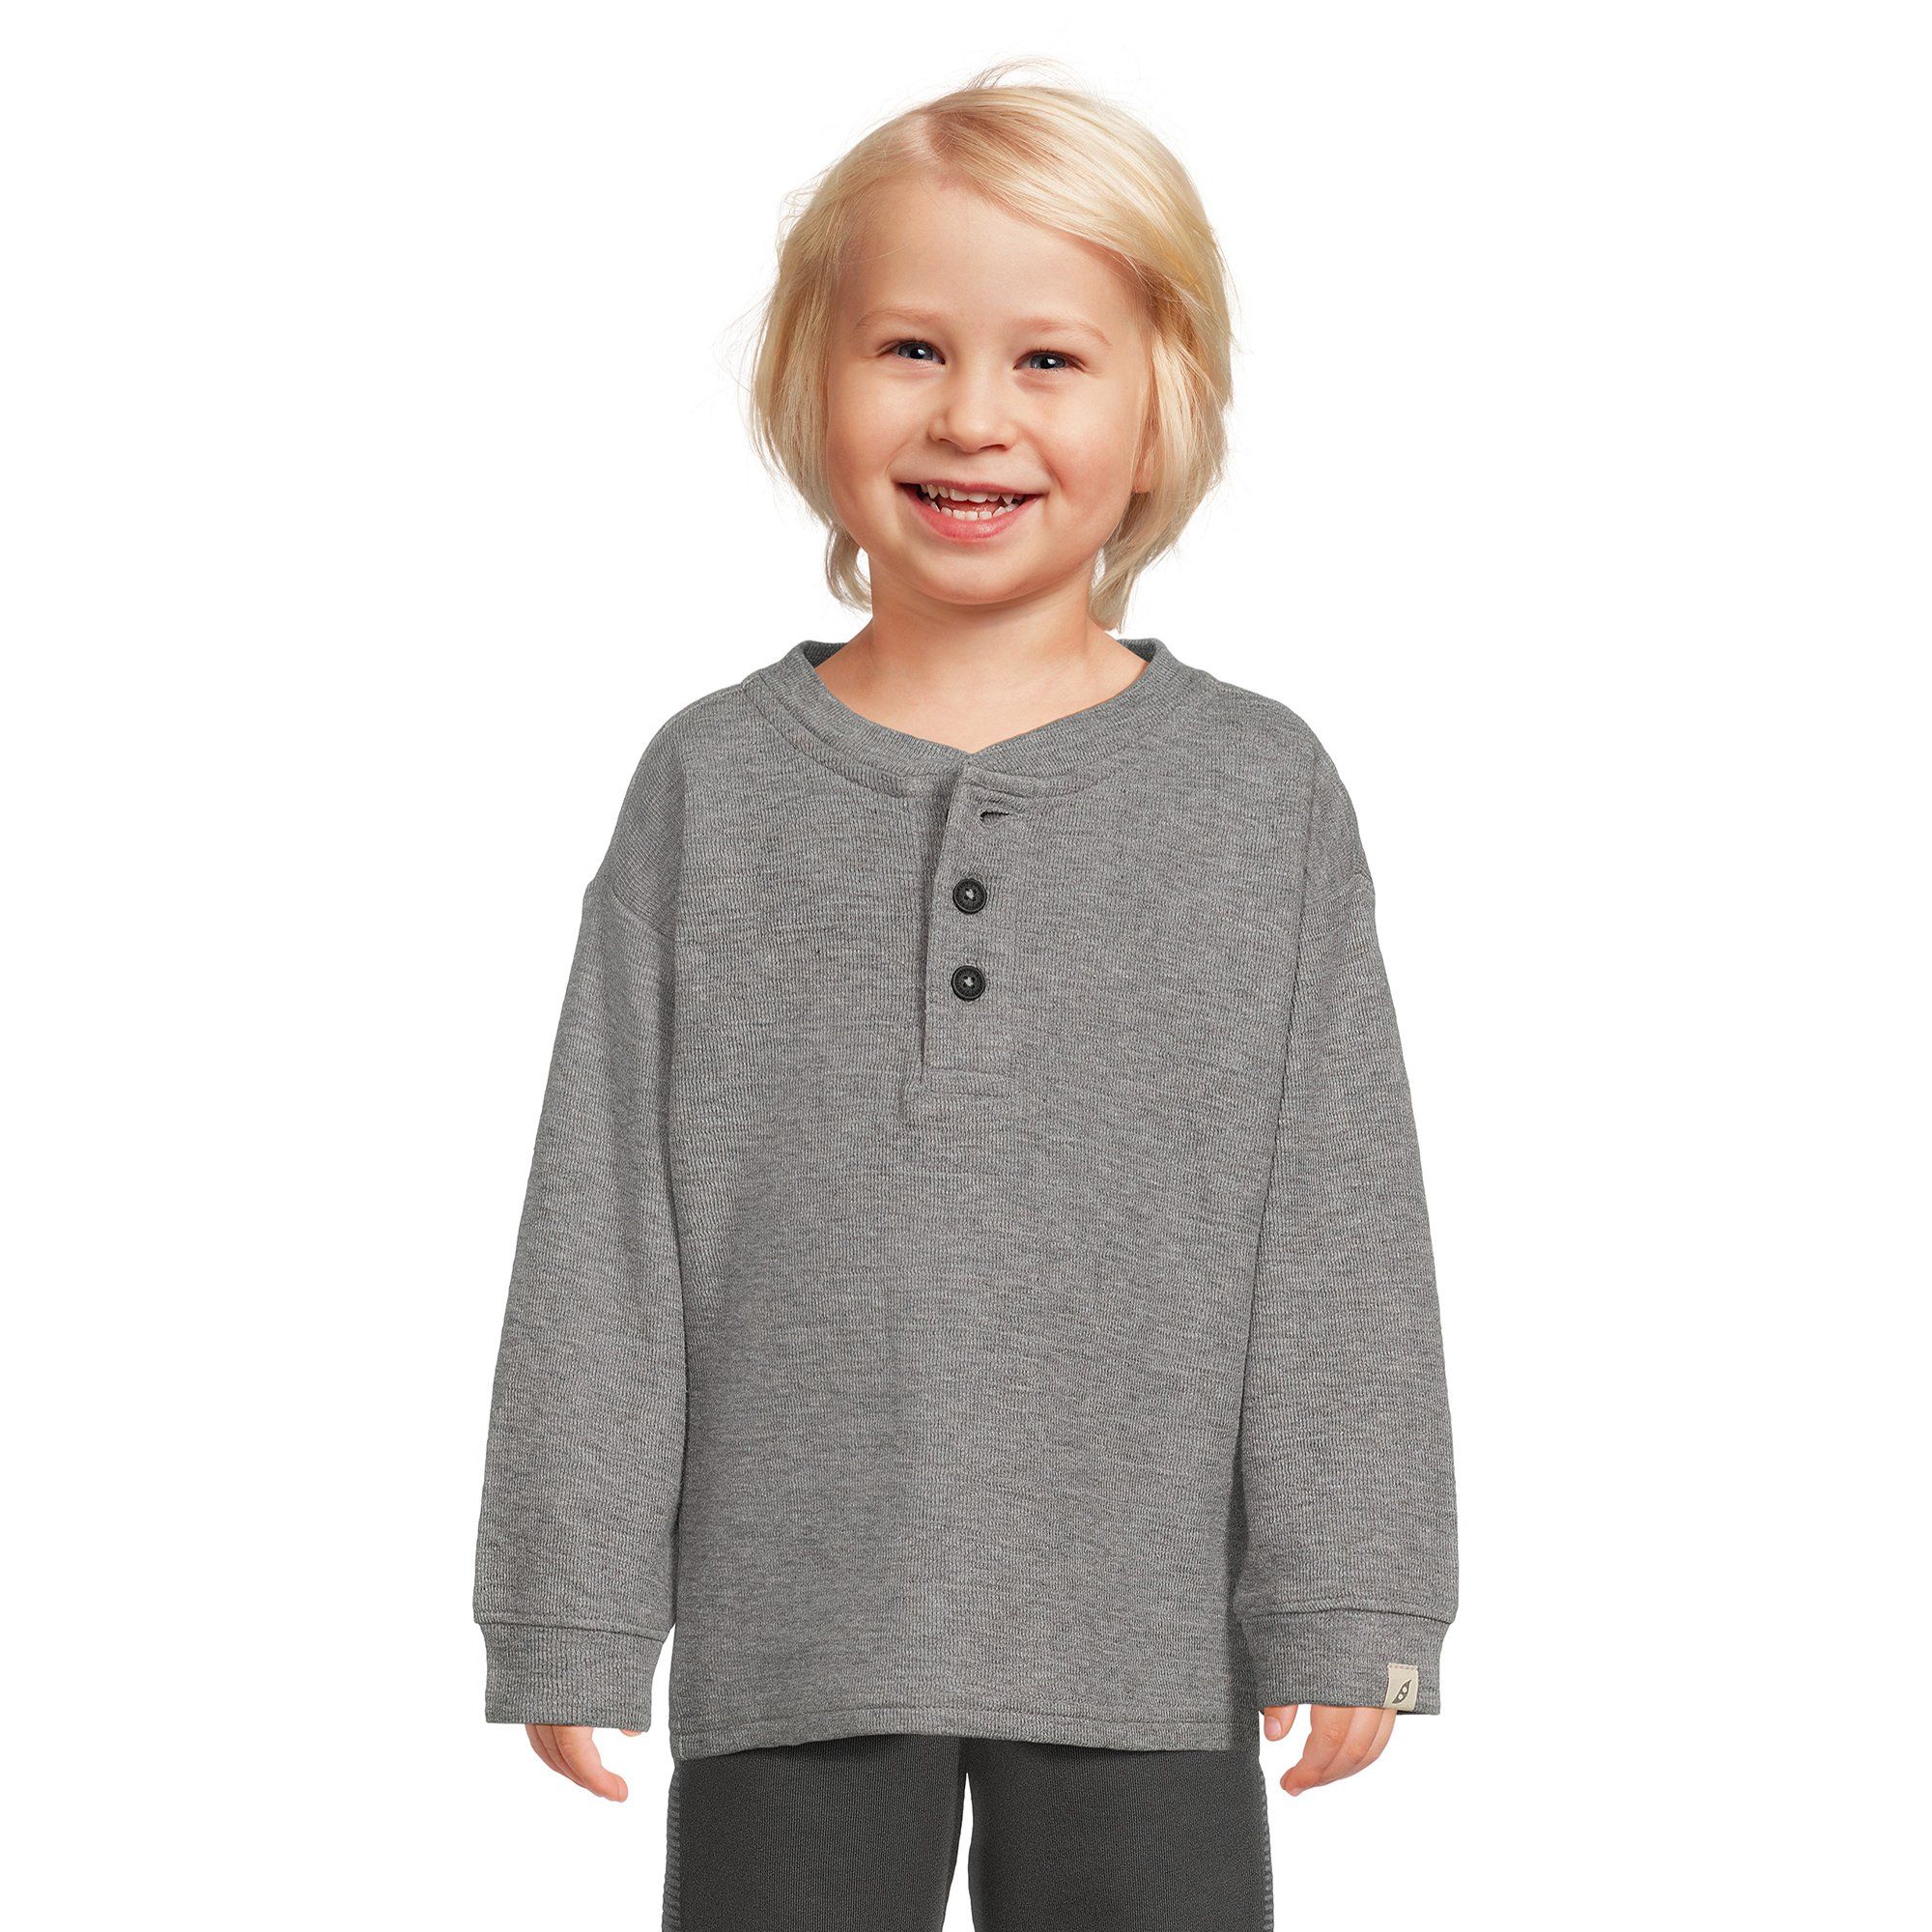 easy-peasy Toddler Boy Long Sleeve Henley T-Shirt, Sizes 12 Months-5T | Walmart (US)